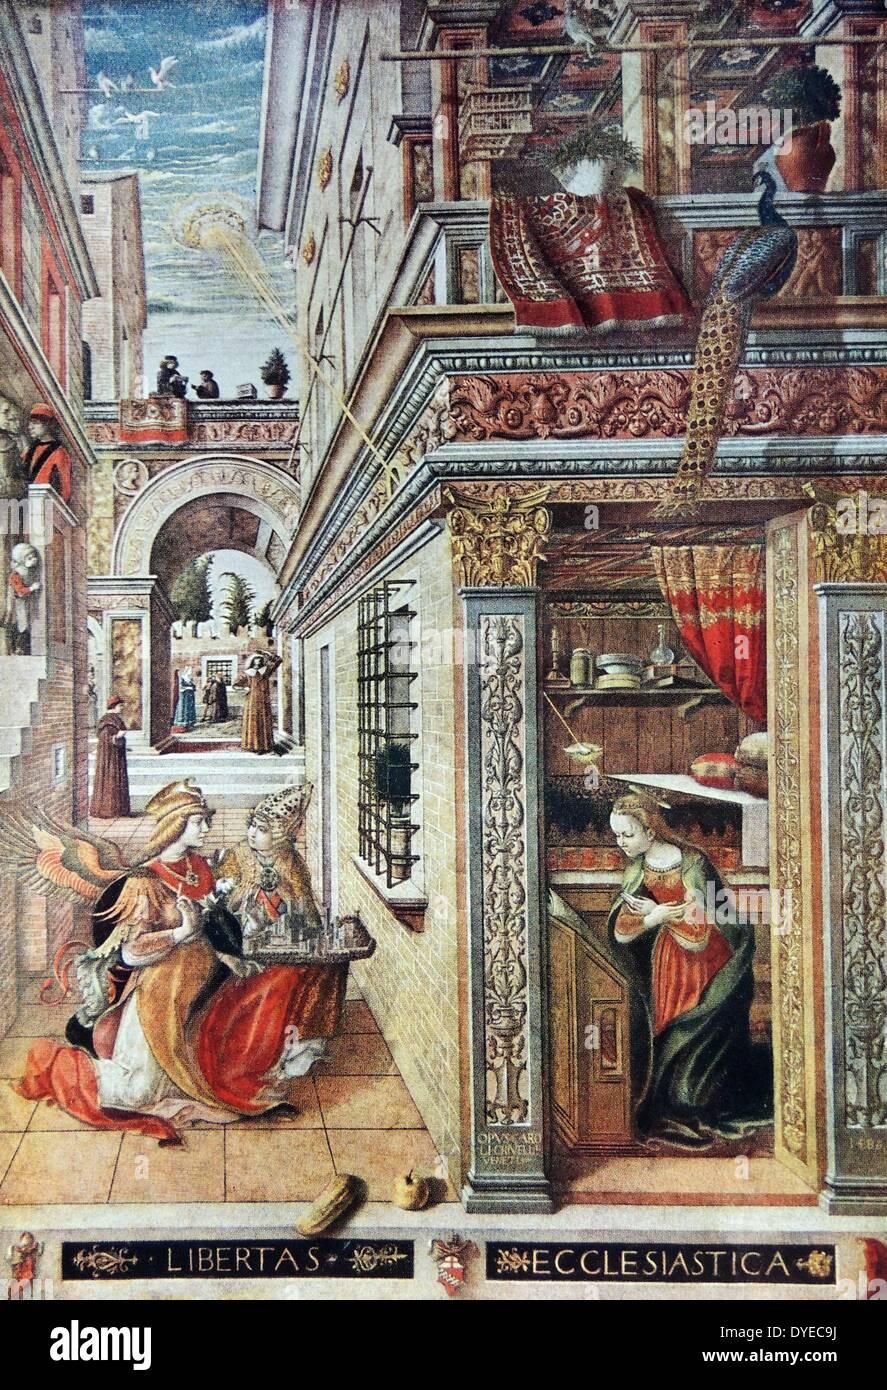 The Annunciation with St Emidius. The painting depicts the Archangel kneeling in an open courtyard announcing to the Virgin that she shall be the Mother of Christ. By Carlo Crivelli (1435 - 1495) Italian painter through the Renaissance and Gothic Art periods. Dated 1486 Stock Photo